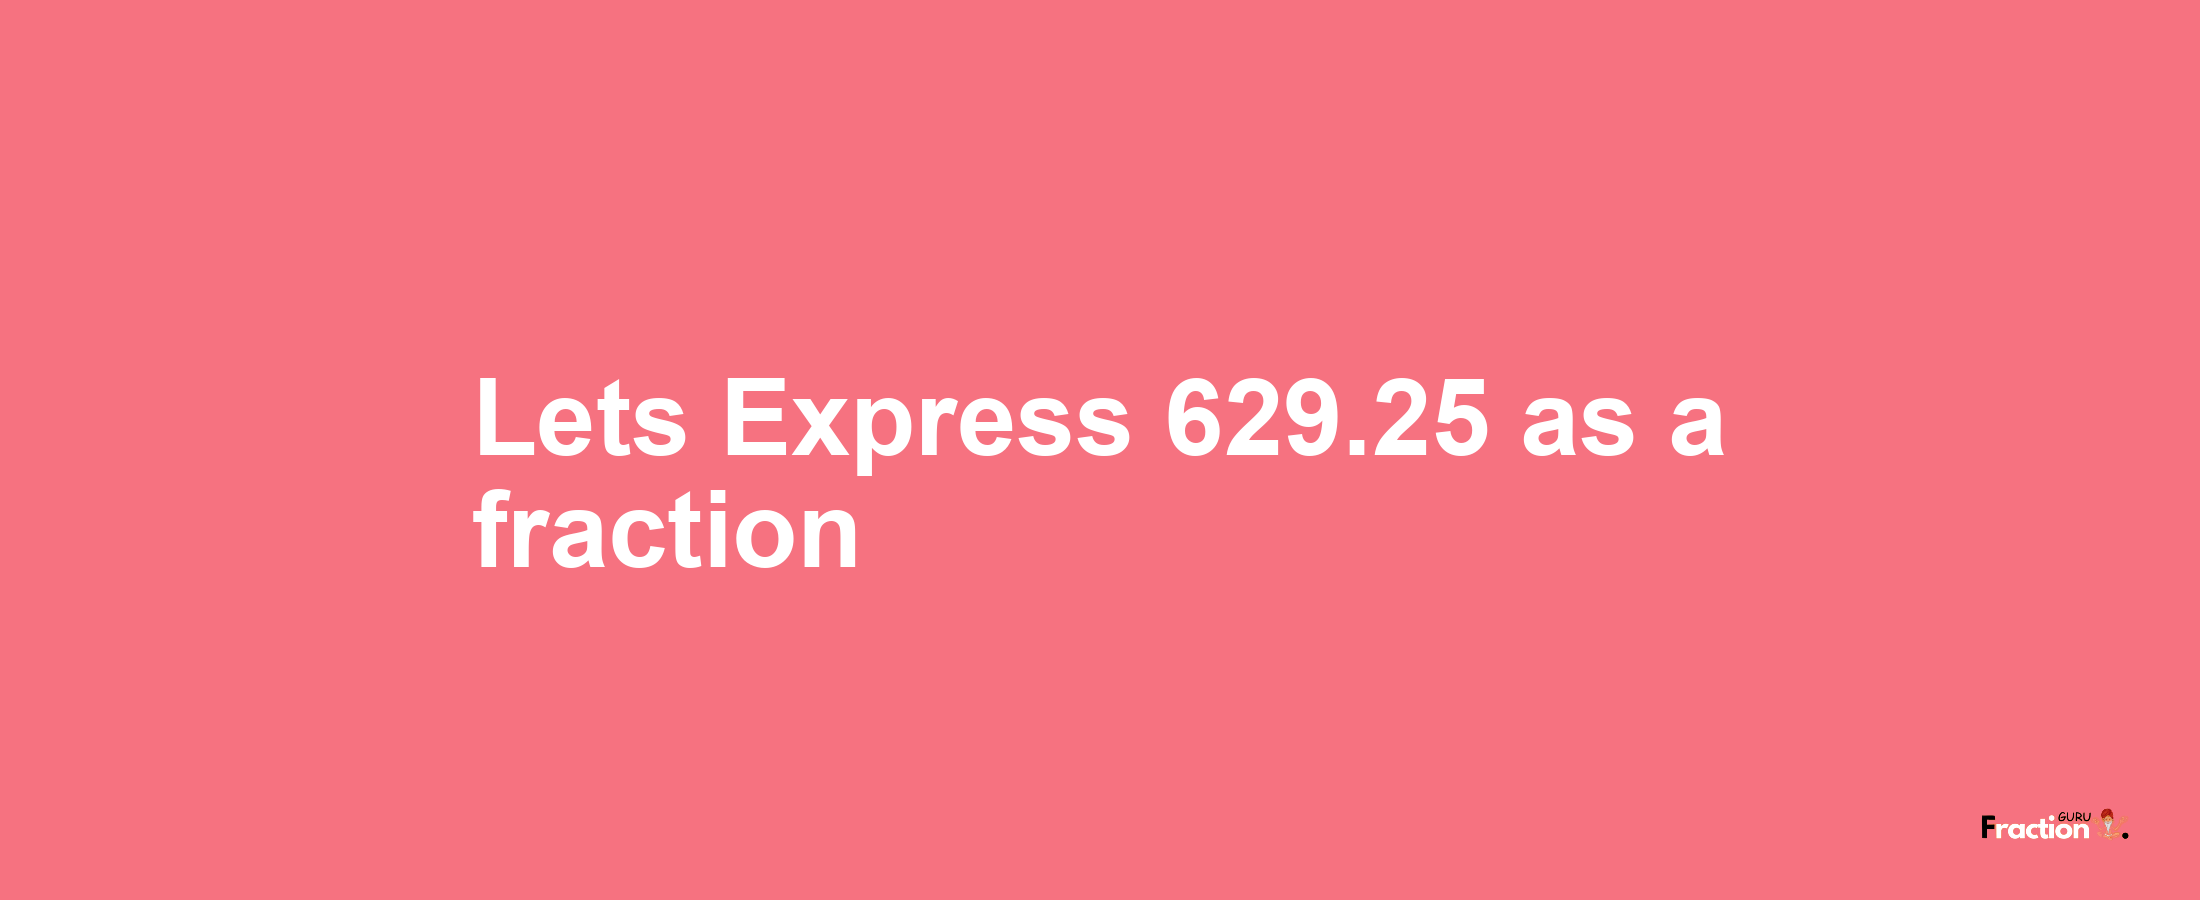 Lets Express 629.25 as afraction